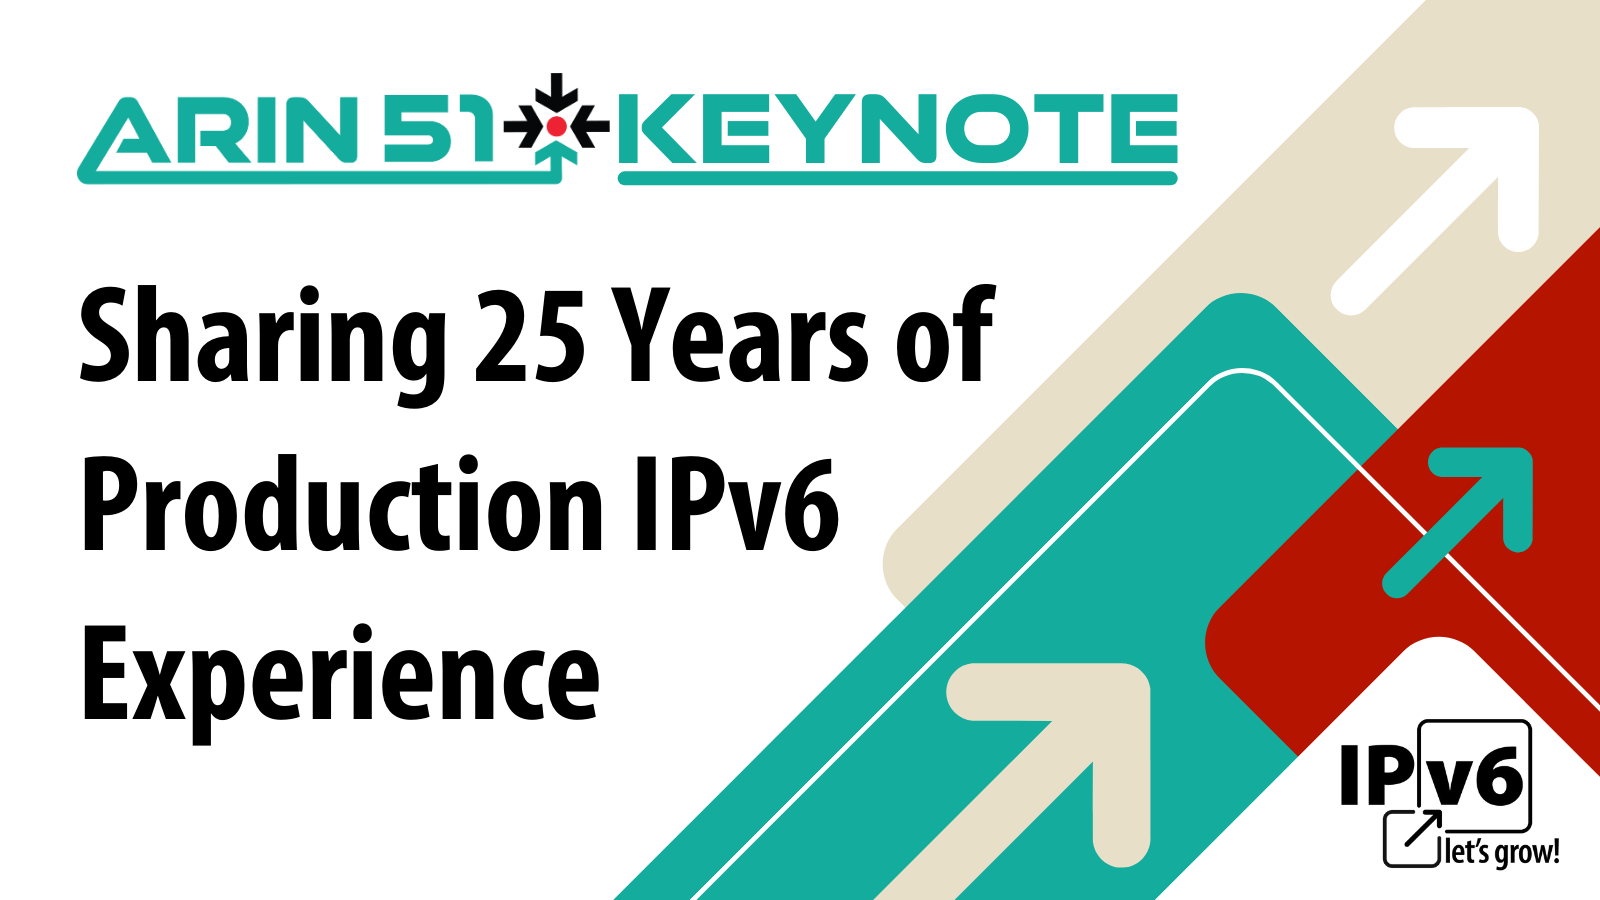 ARIN 51 Keynote Address Shares 25 Years of Production IPv6 Experience